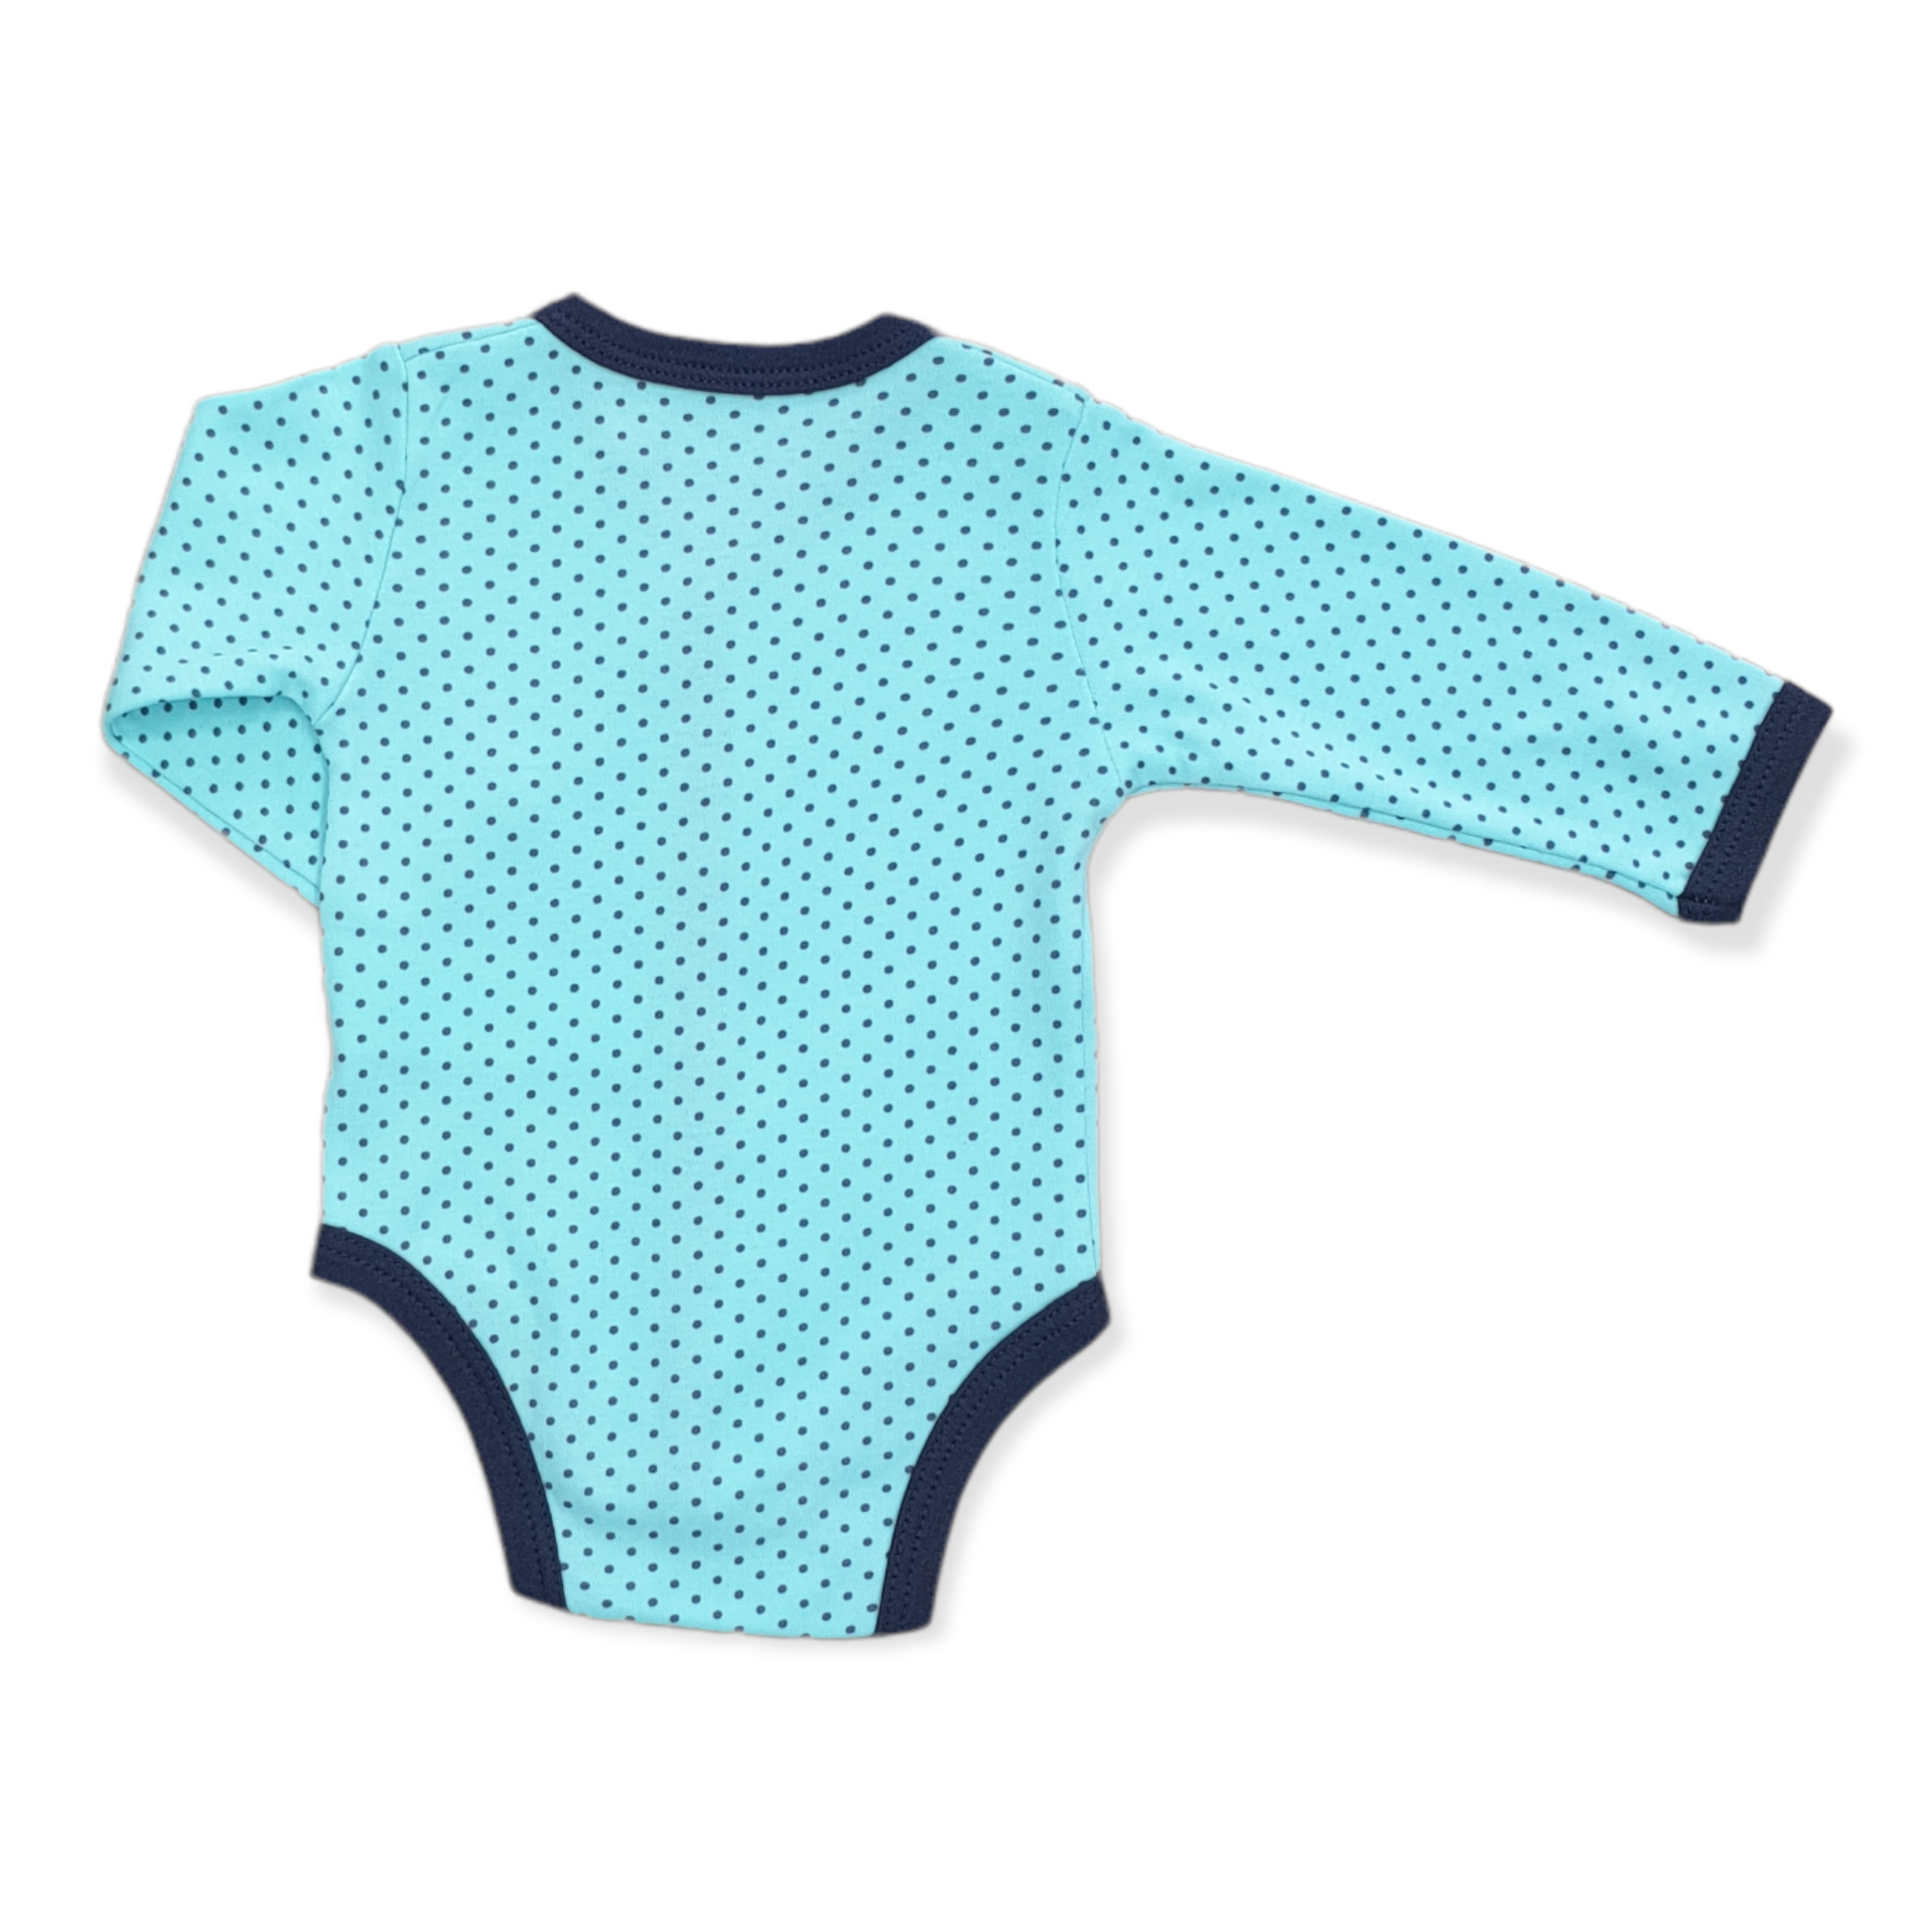 Dotted Baby Boy Body-Black, Body, Bodysuit, catboy, Creeper, Cyan, Dotted, Girl, Green, Long Sleeve, Onesie, Pattern, Purple-VEO-[Too Twee]-[Tootwee]-[baby]-[newborn]-[clothes]-[essentials]-[toys]-[Lebanon]